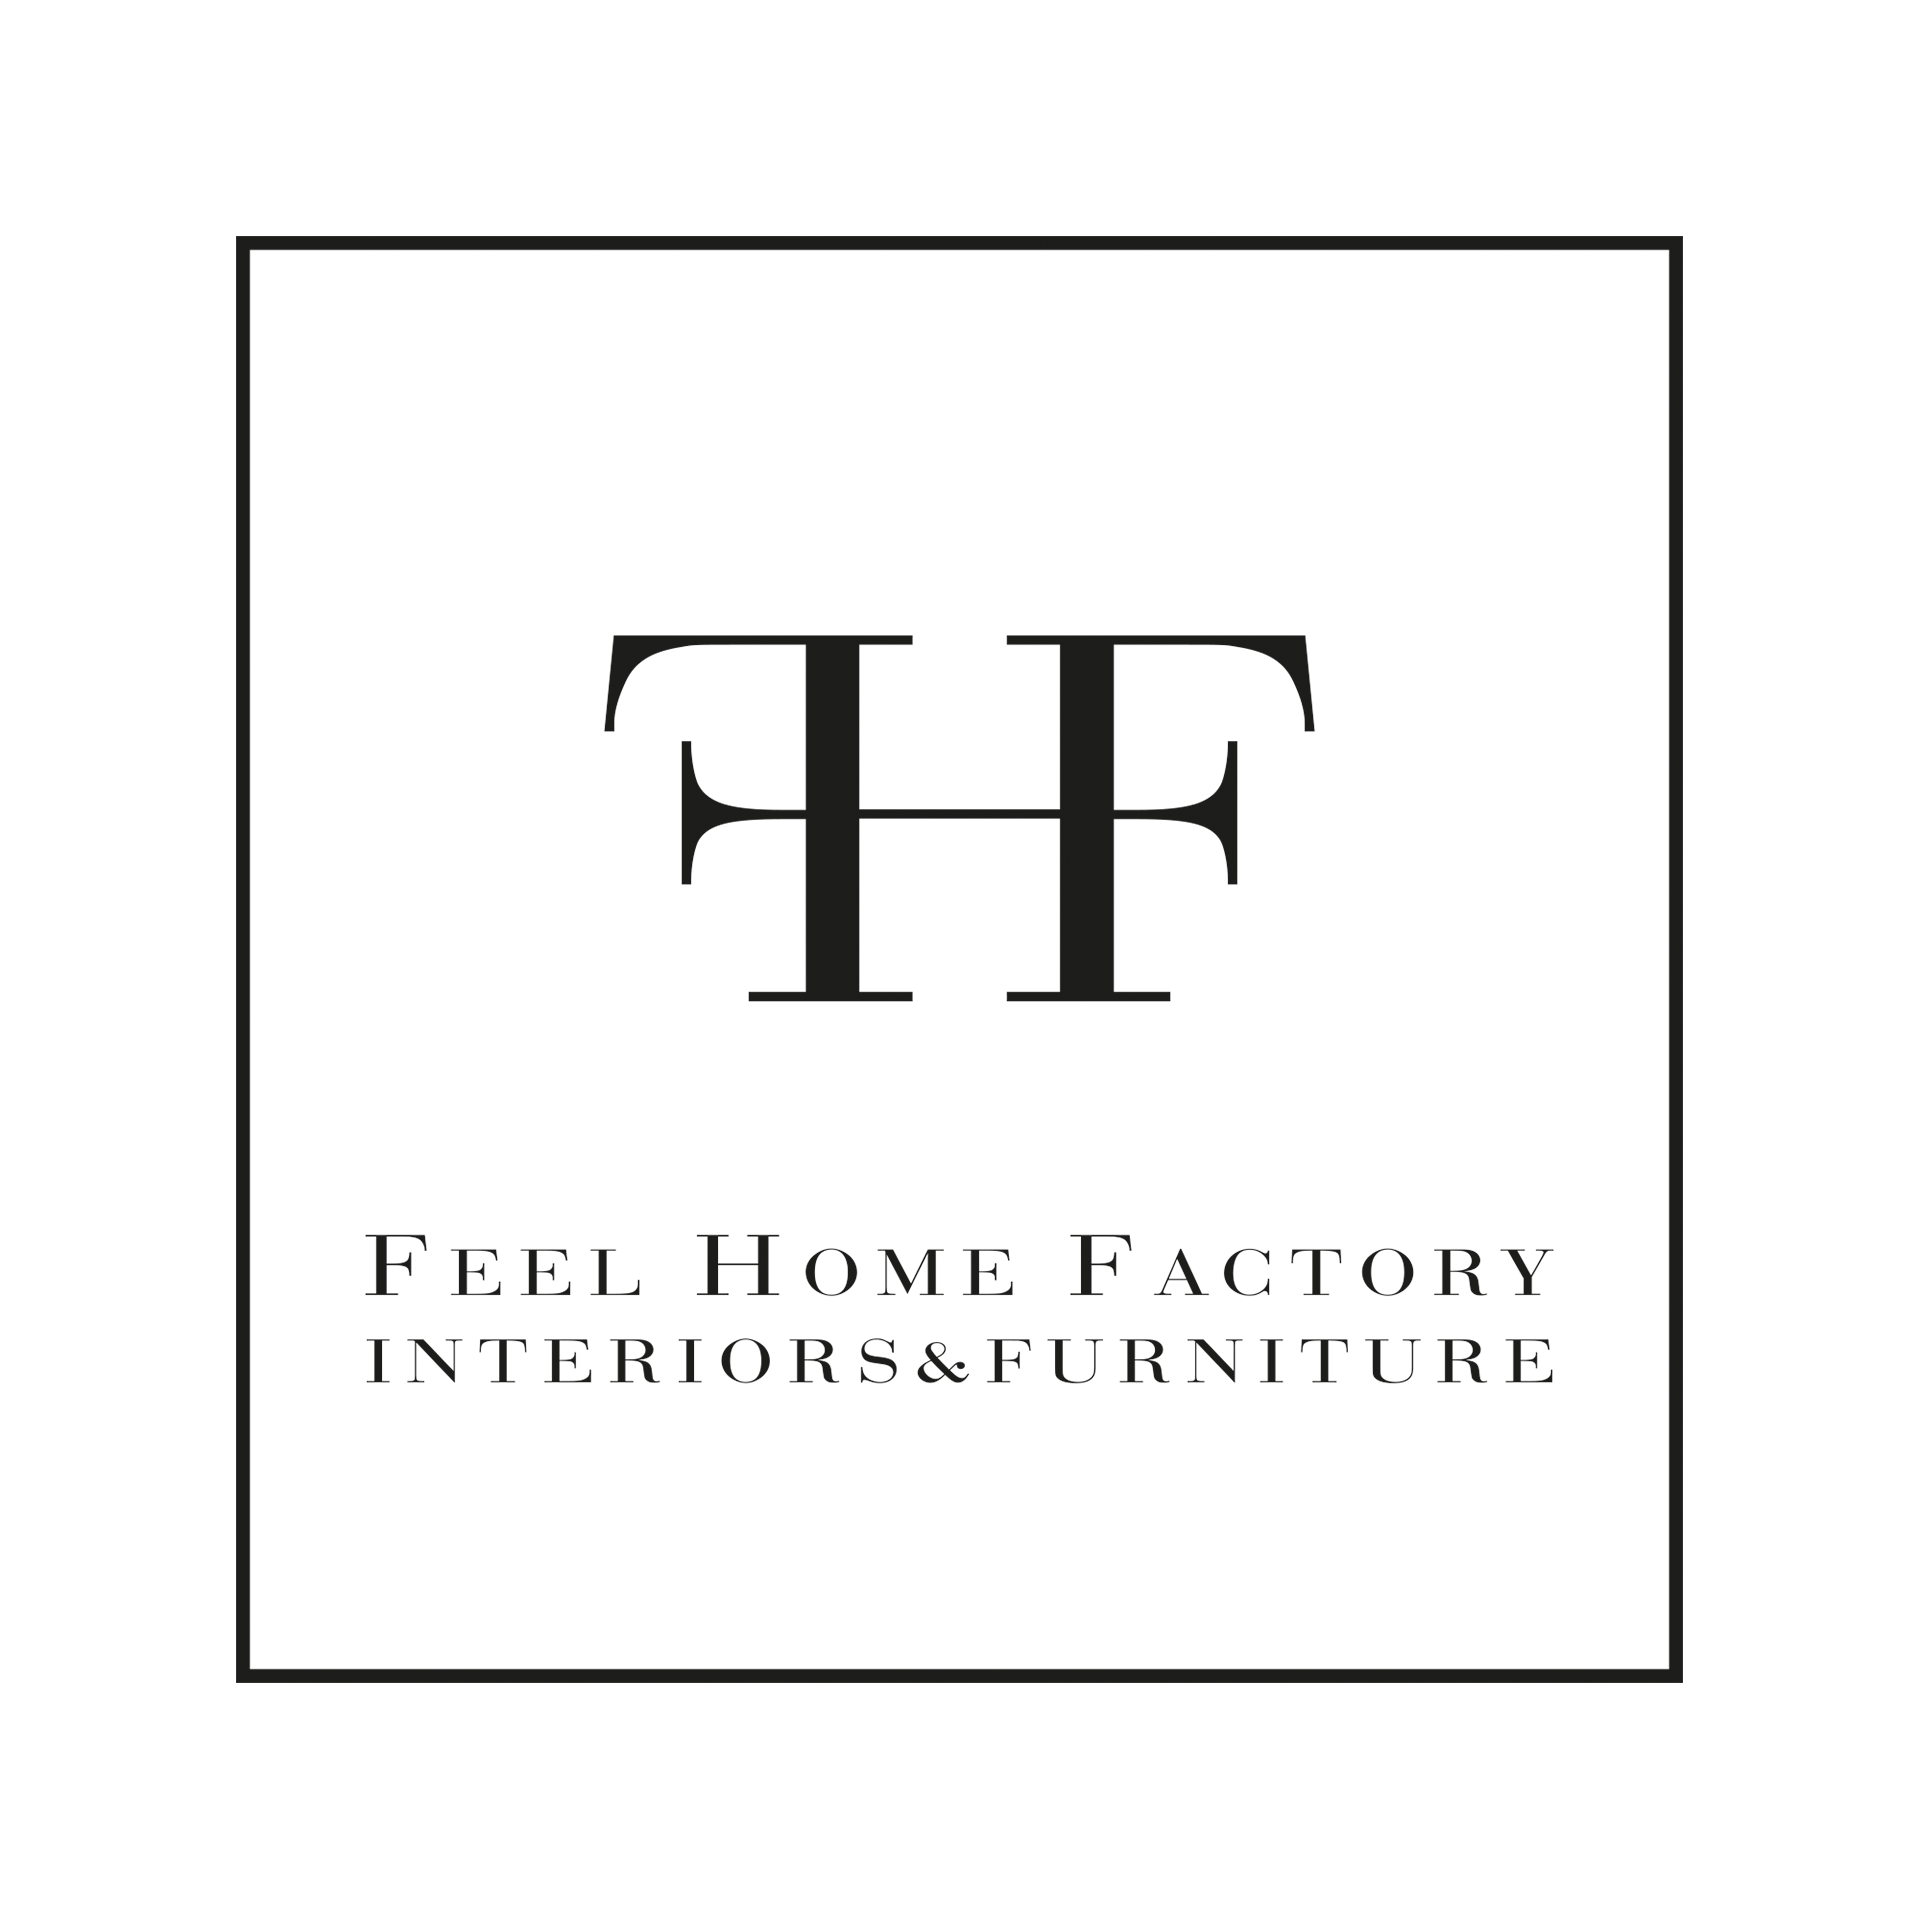 Feel Home Factory